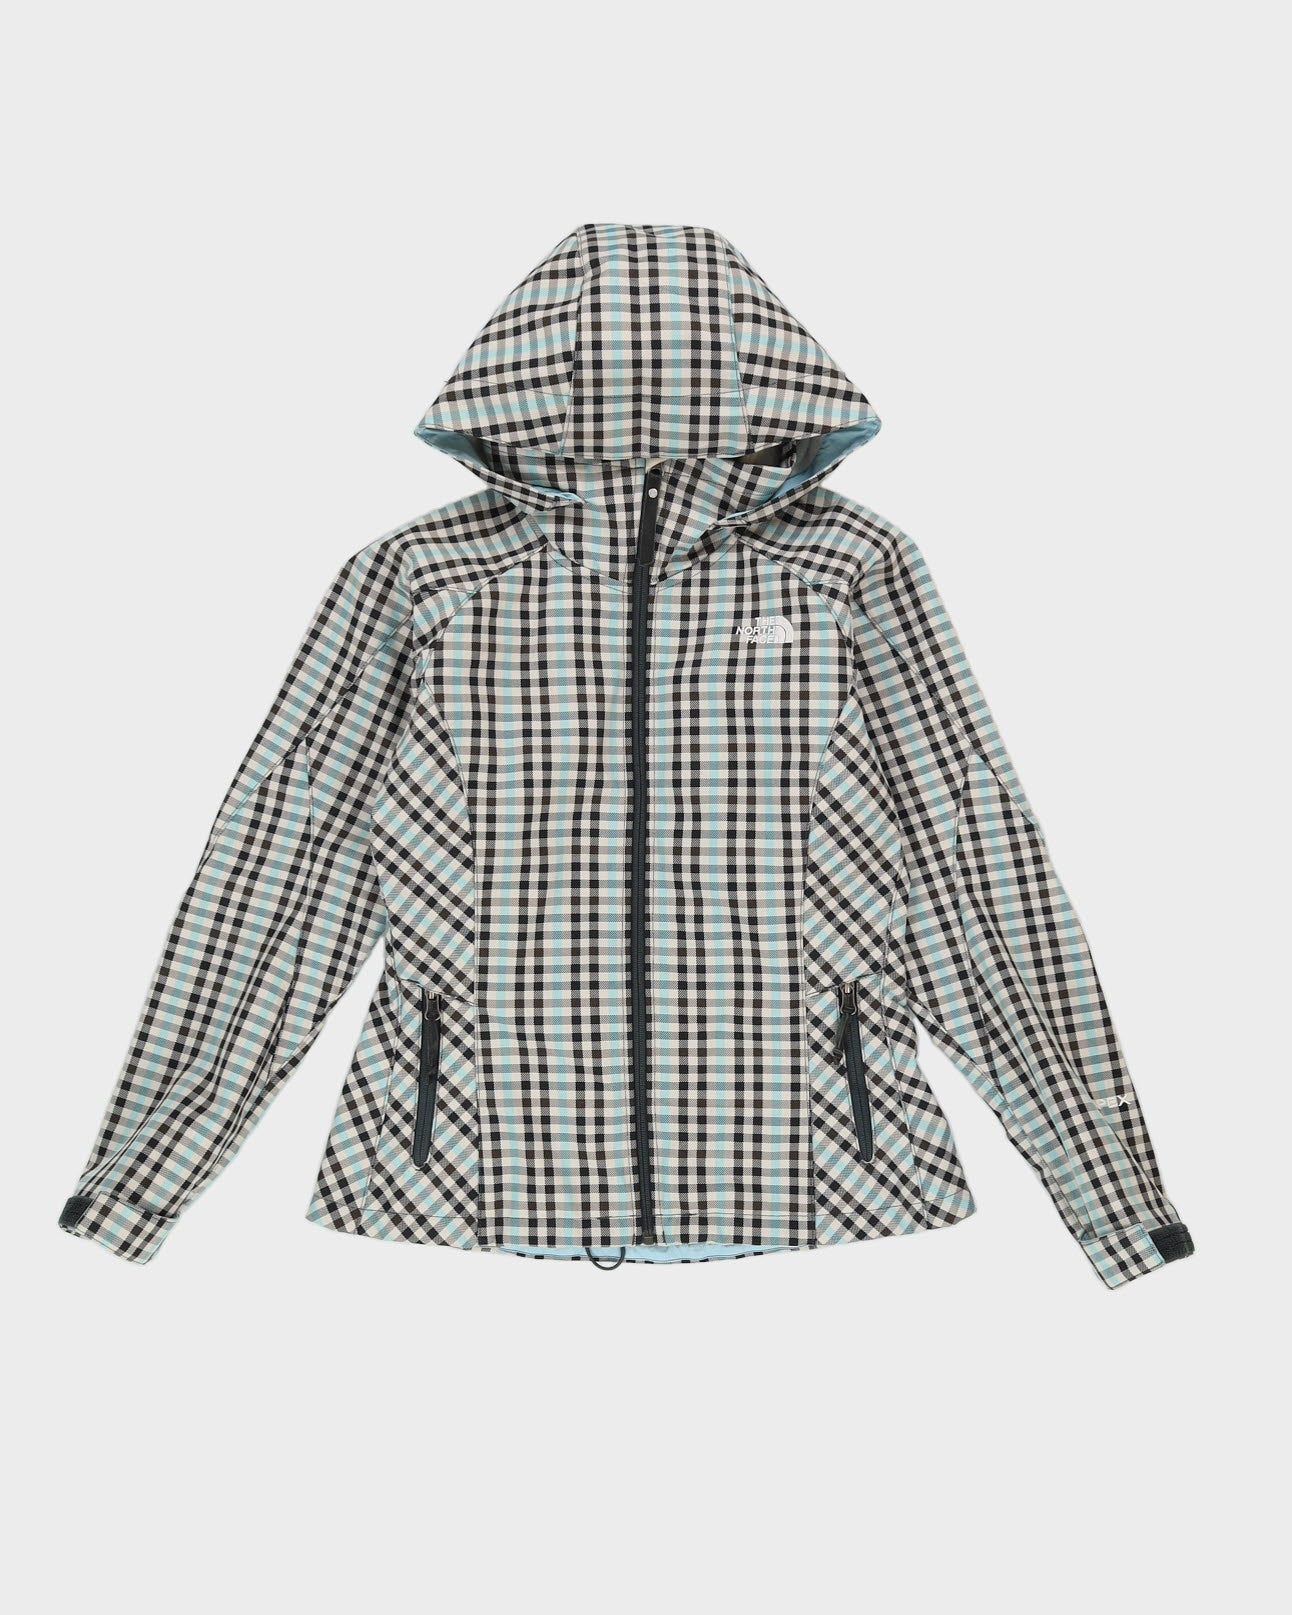 The North Face Blue Patterned Apex Jacket - S